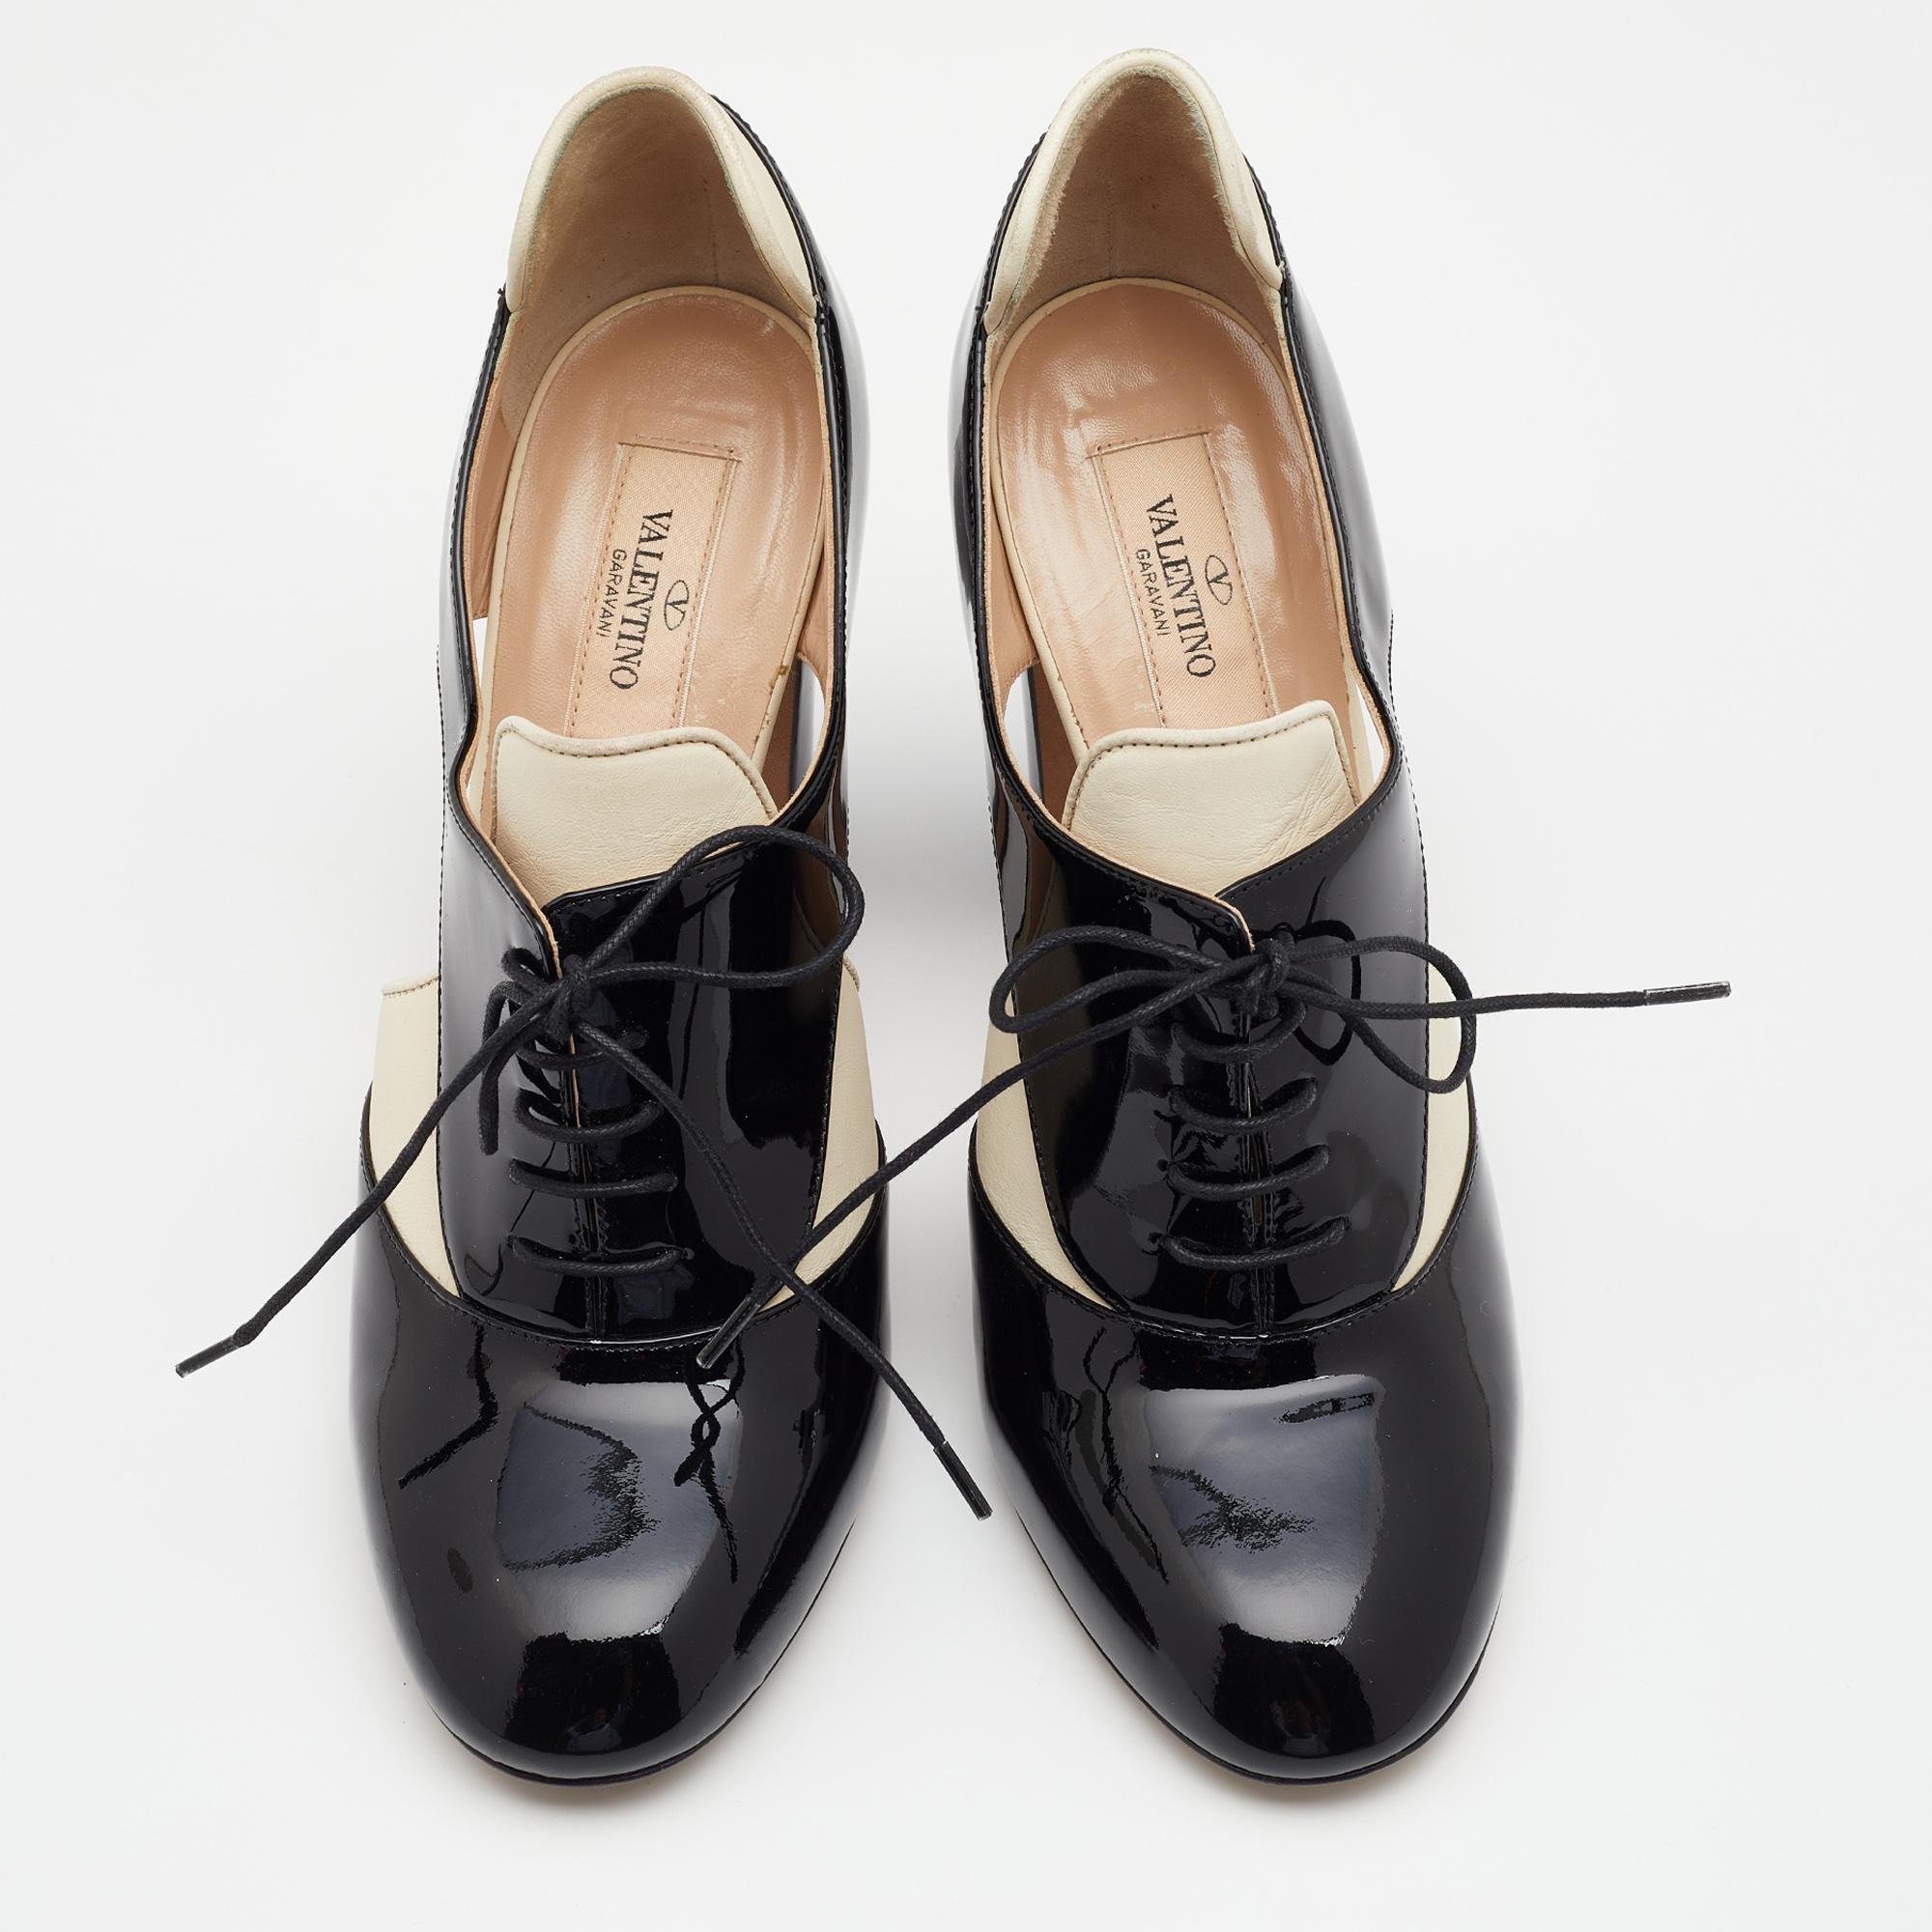 Valentino presents a modern, feminine reinterpretation of the Spectator shoes. These patent and leather pumps feature 10.5 cm block heels and contrasting black-cream hues. With lace-up detailing and cut-outs, they present the perfect amalgamation of